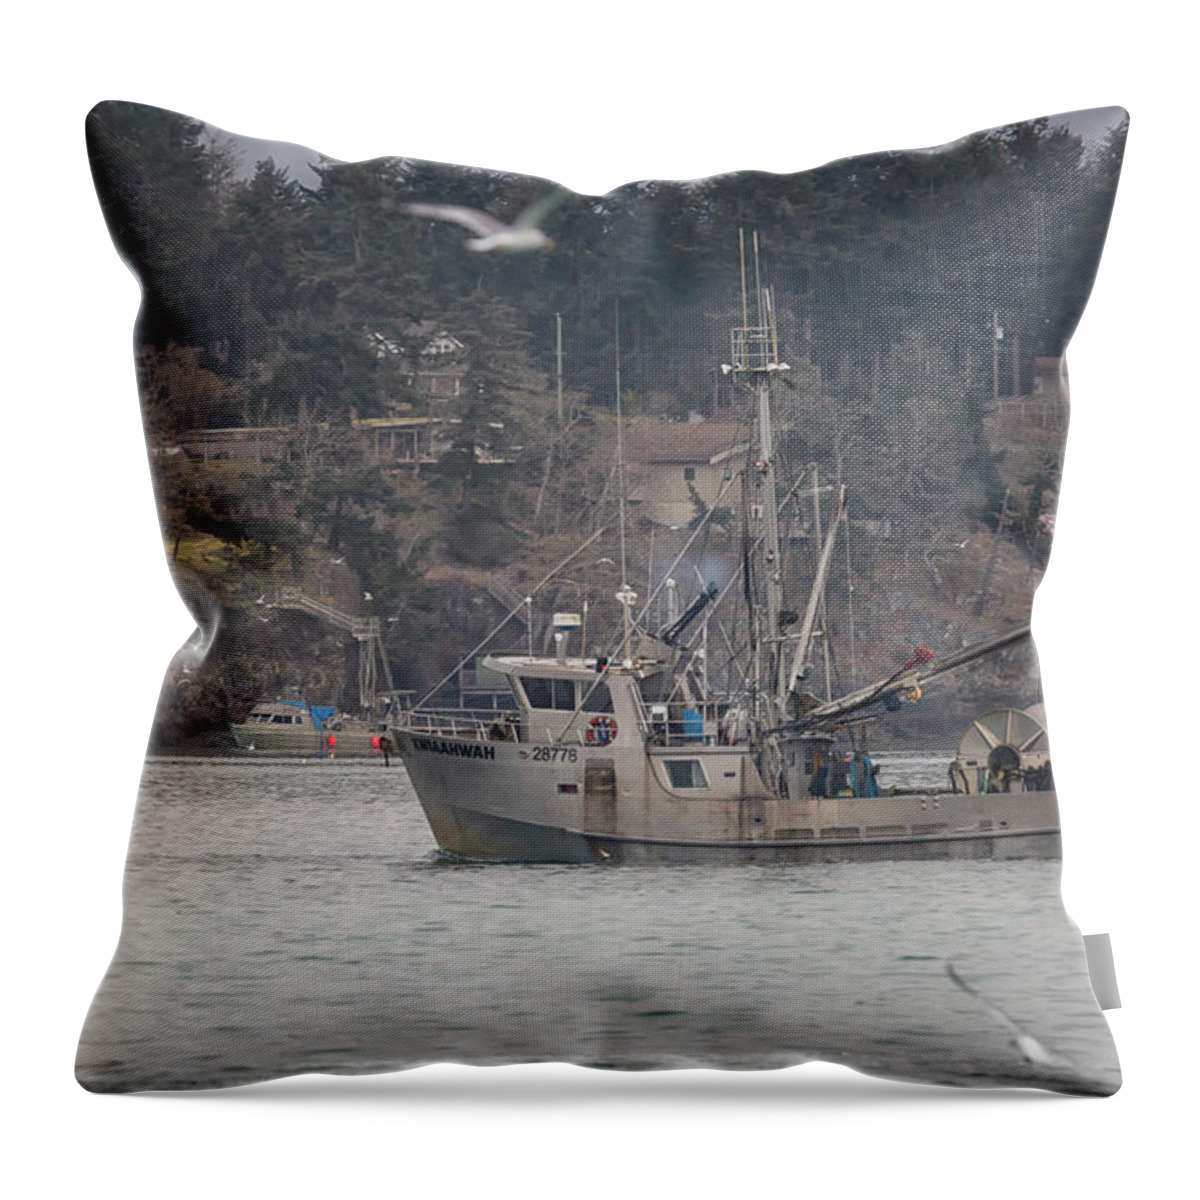 Kwiaahwah Throw Pillow featuring the photograph Kwiaahwah by Randy Hall